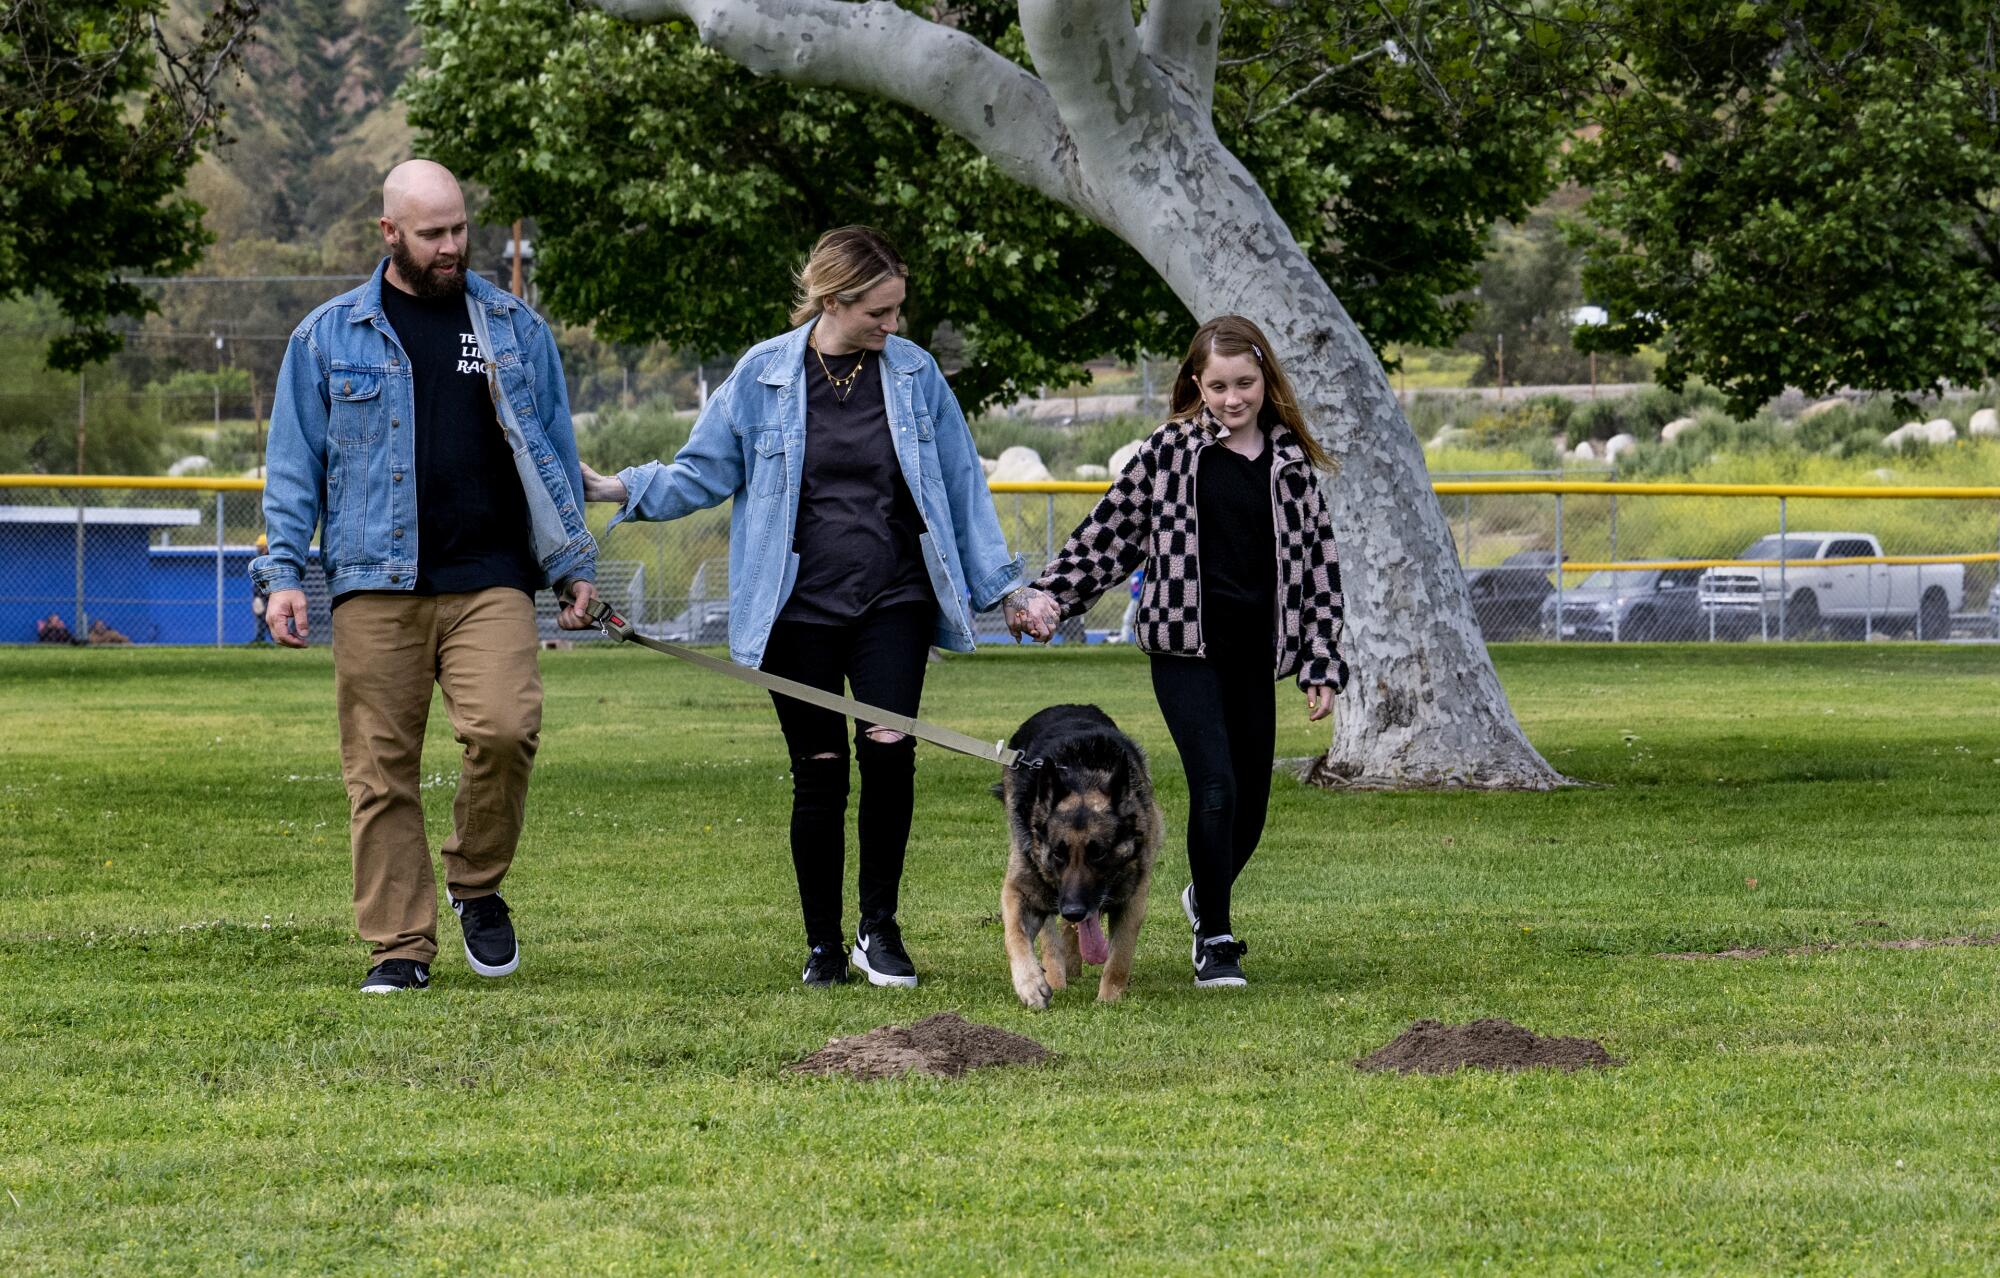 A husband holds a leash while walking a German shepherd around with his wife and daughter.